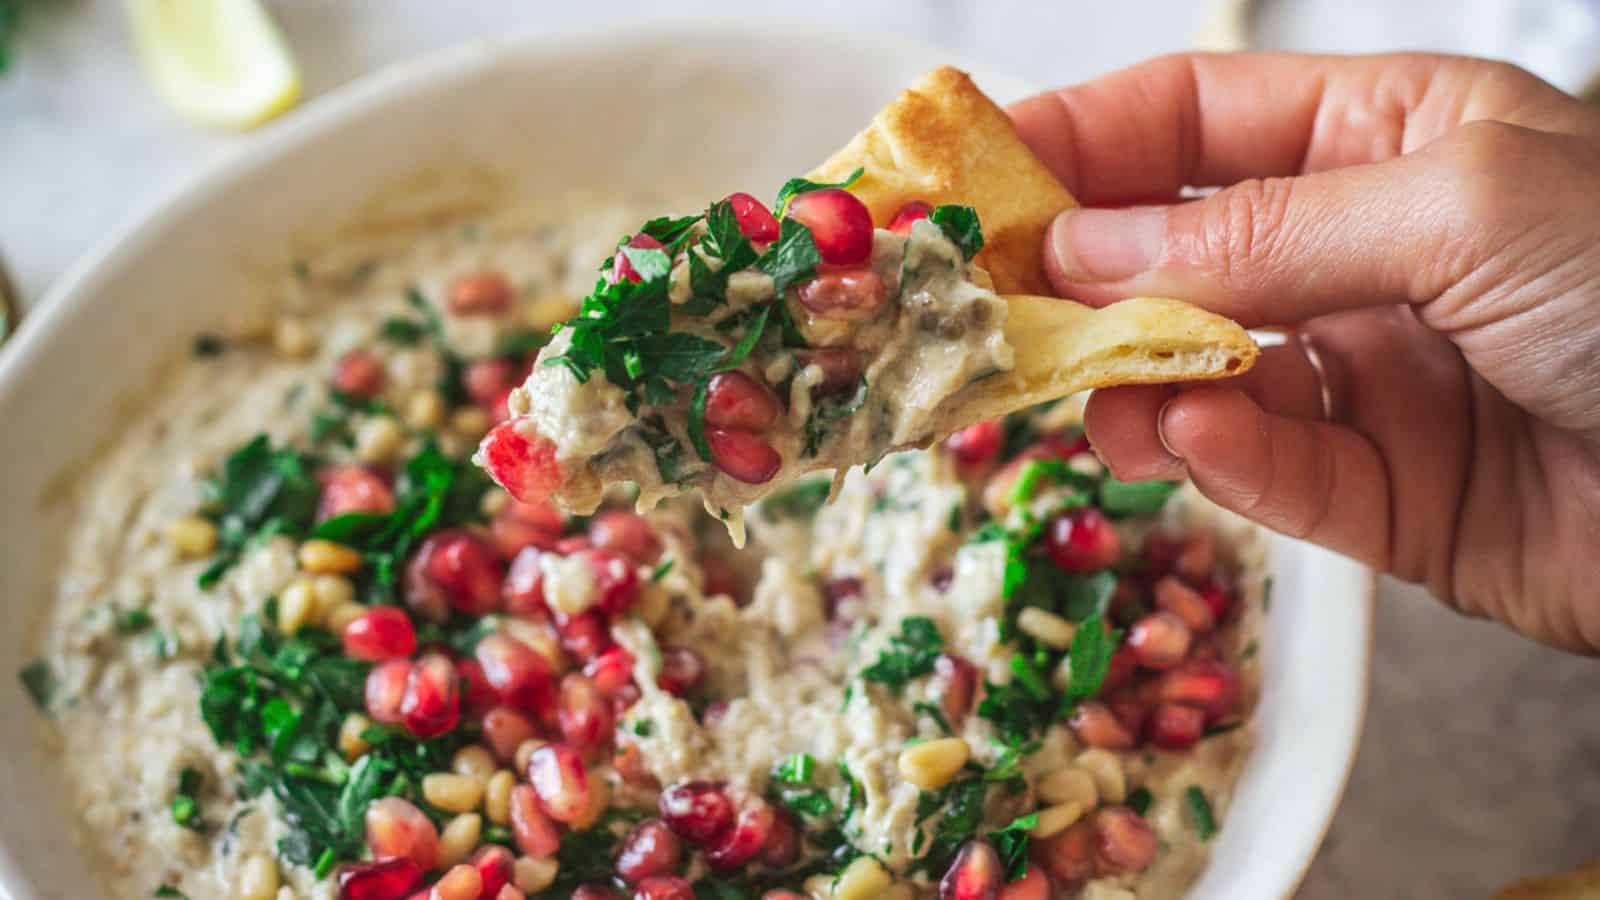 Baba ganoush on a plate with pomegranate seeds, parsley.